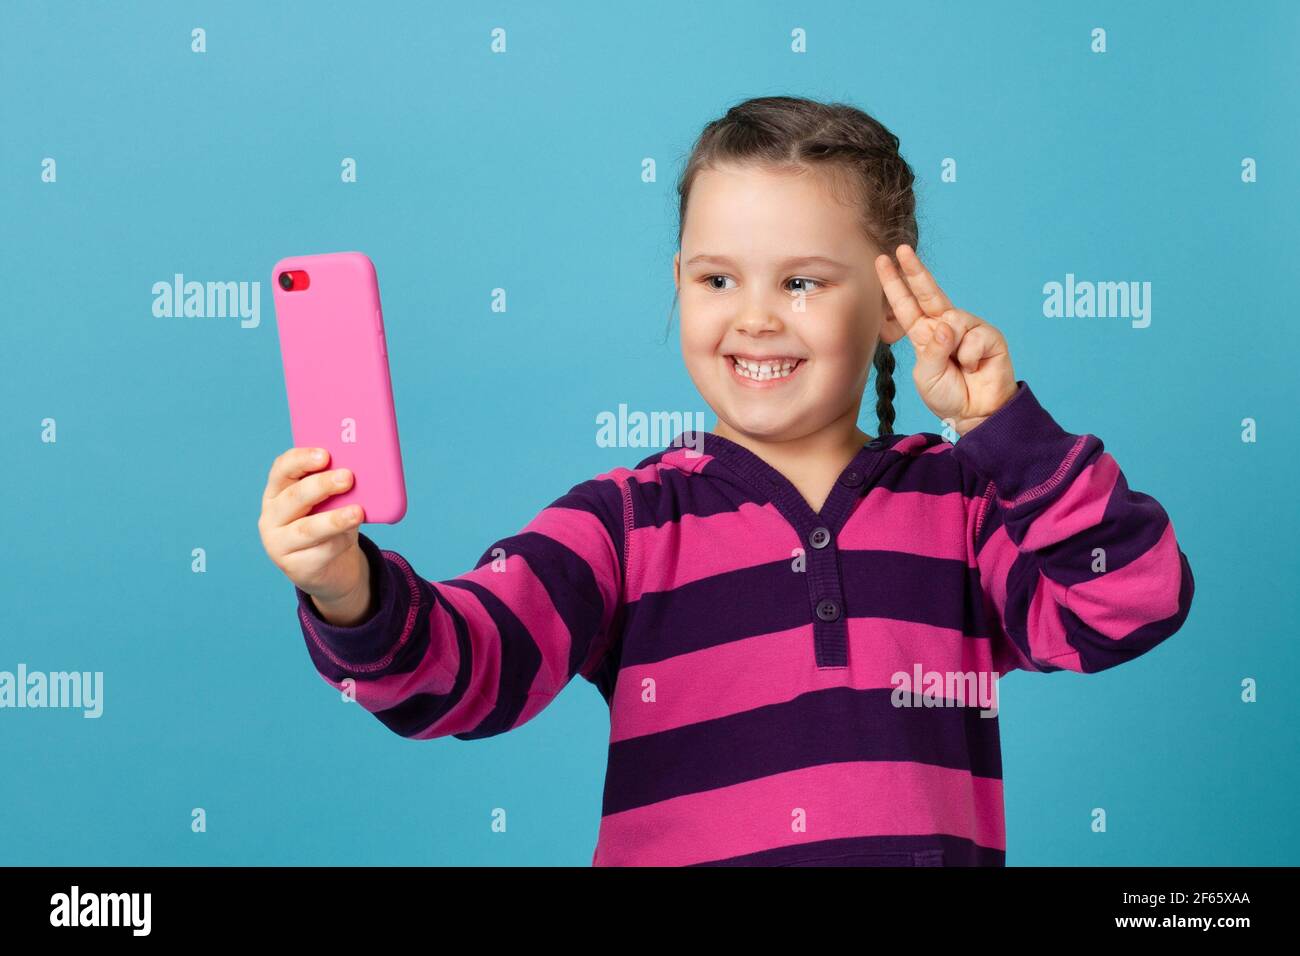 child girl smiling and taking selfie, making a phone call on a pink phone and showing a victory sign with her fingers, isolated on a blue background Stock Photo